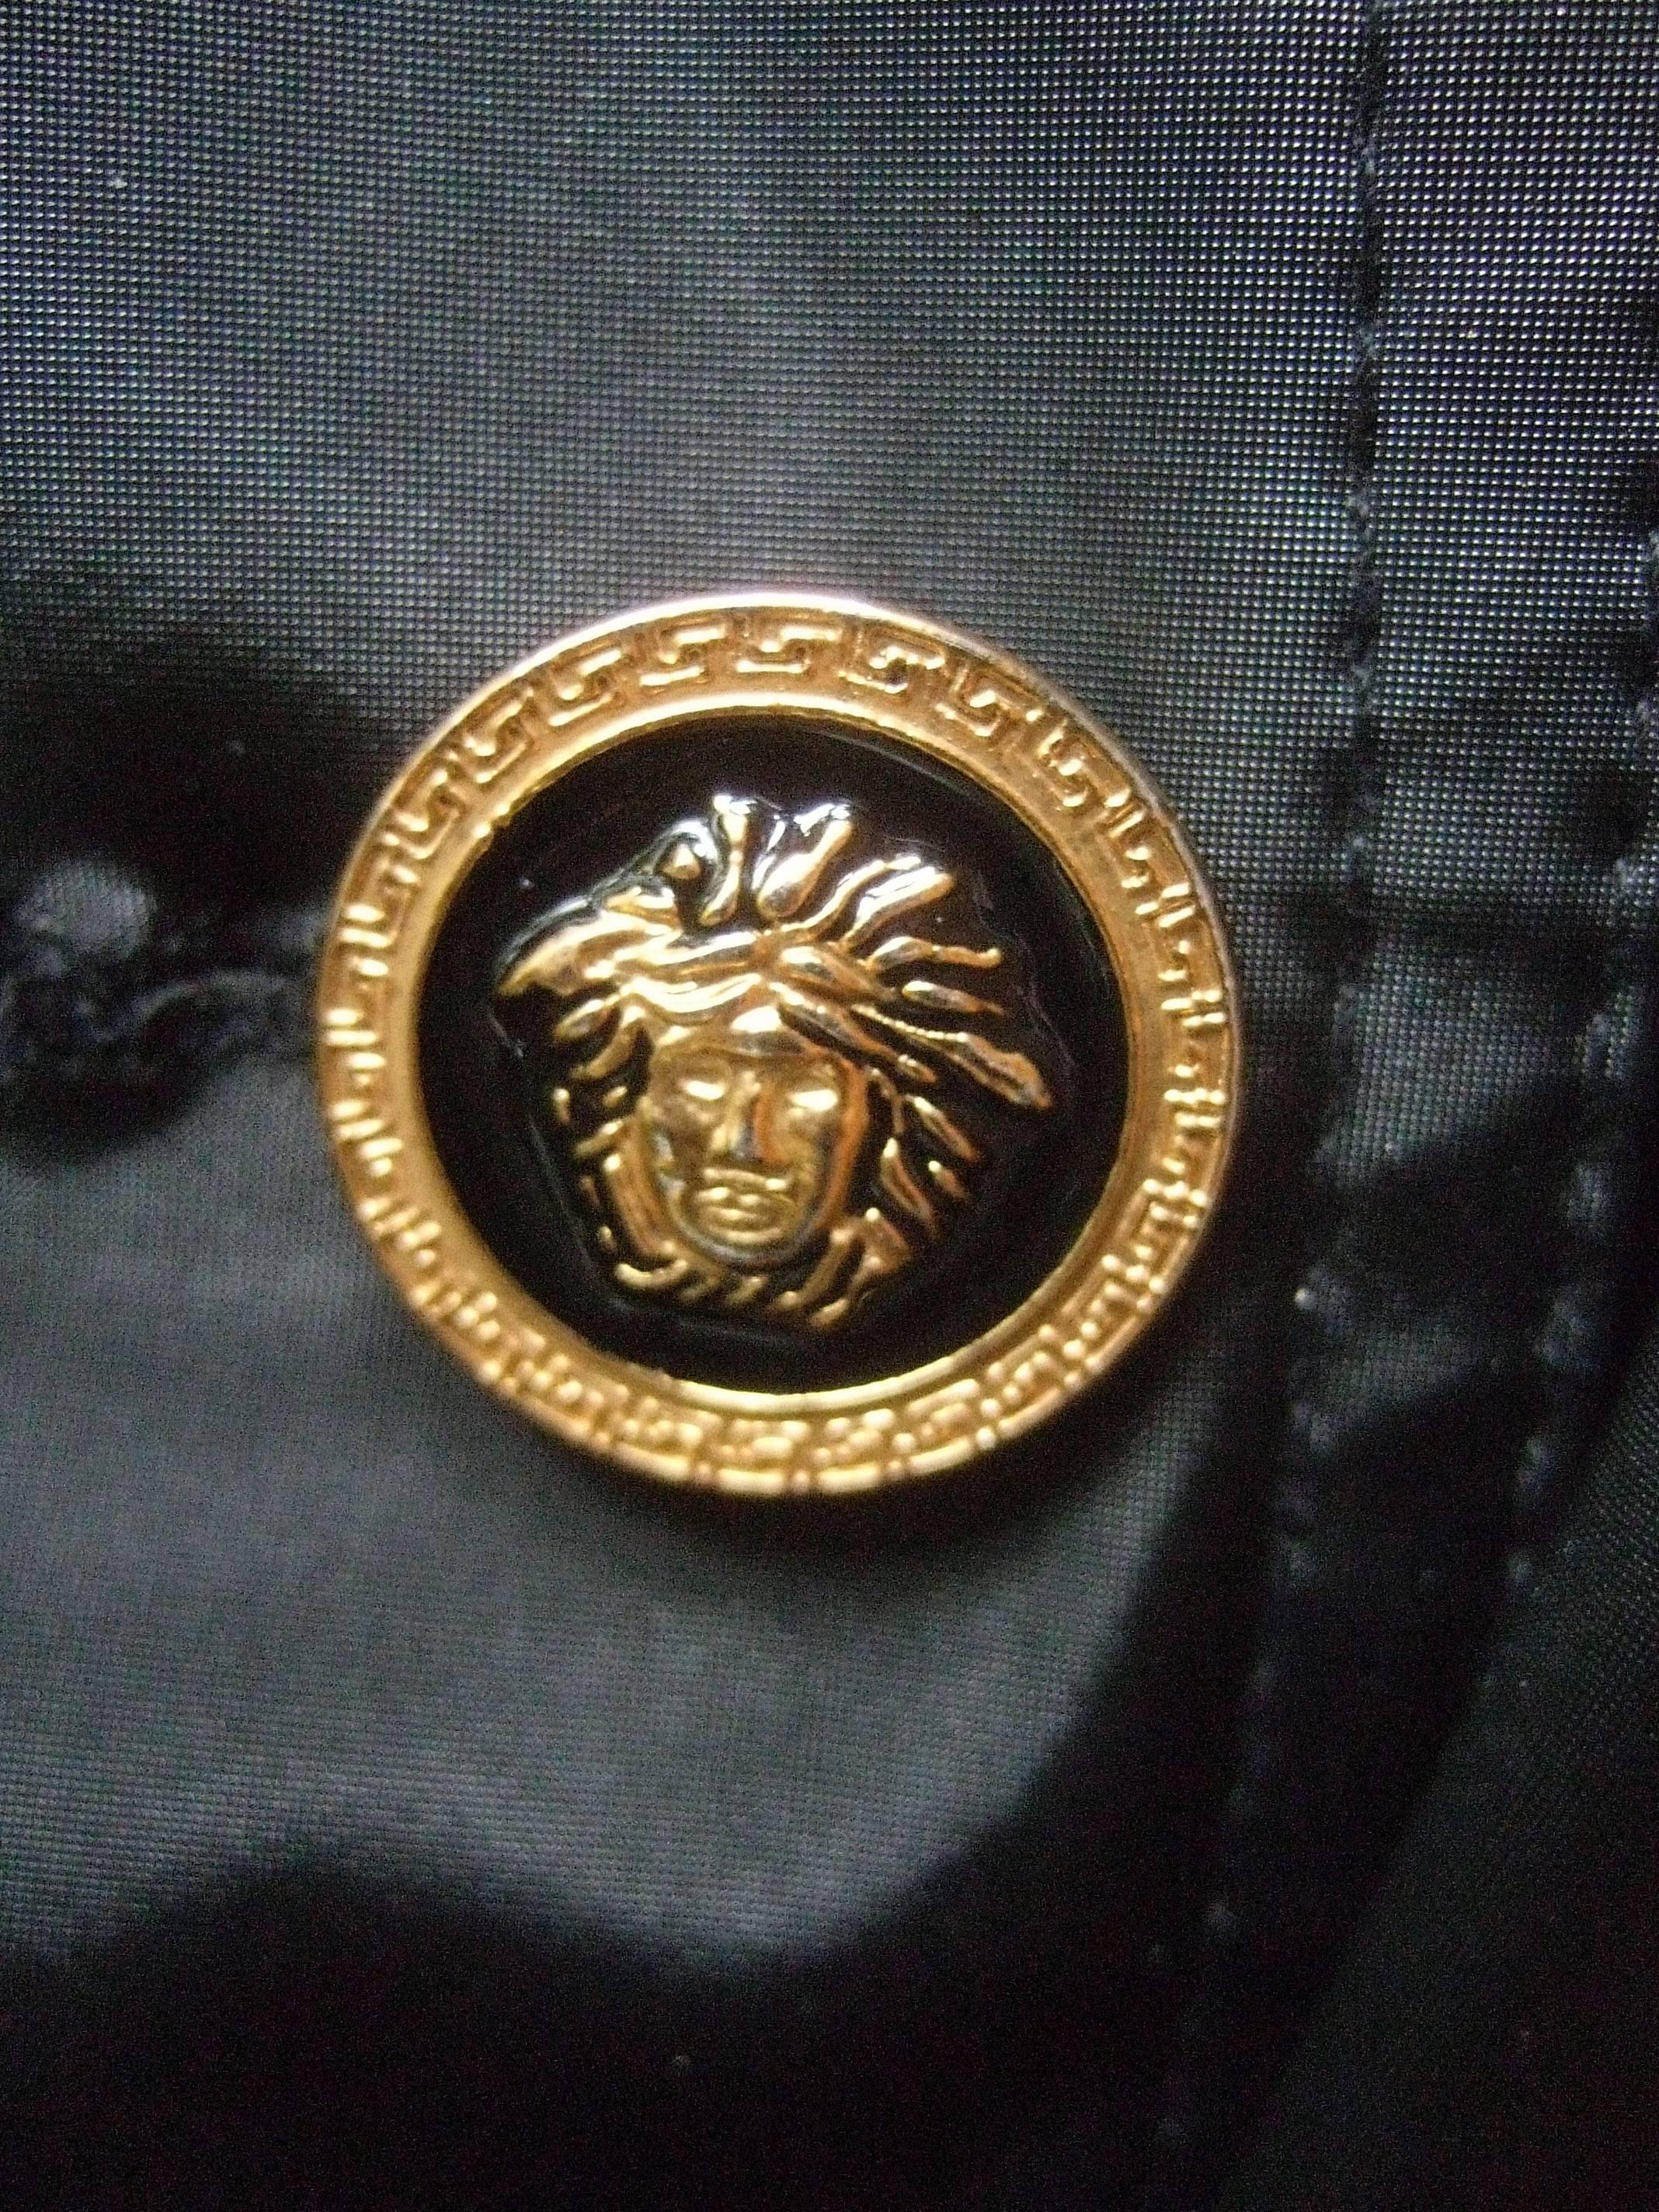 Versace Jeans Couture Sleek black all weather belted jacket  Size L
The stylish water repellent belted heavy gauge nylon jacket
is adorned with four gilt metal enamel medusa head buttons

The designer jacket has two front slash pockets
The